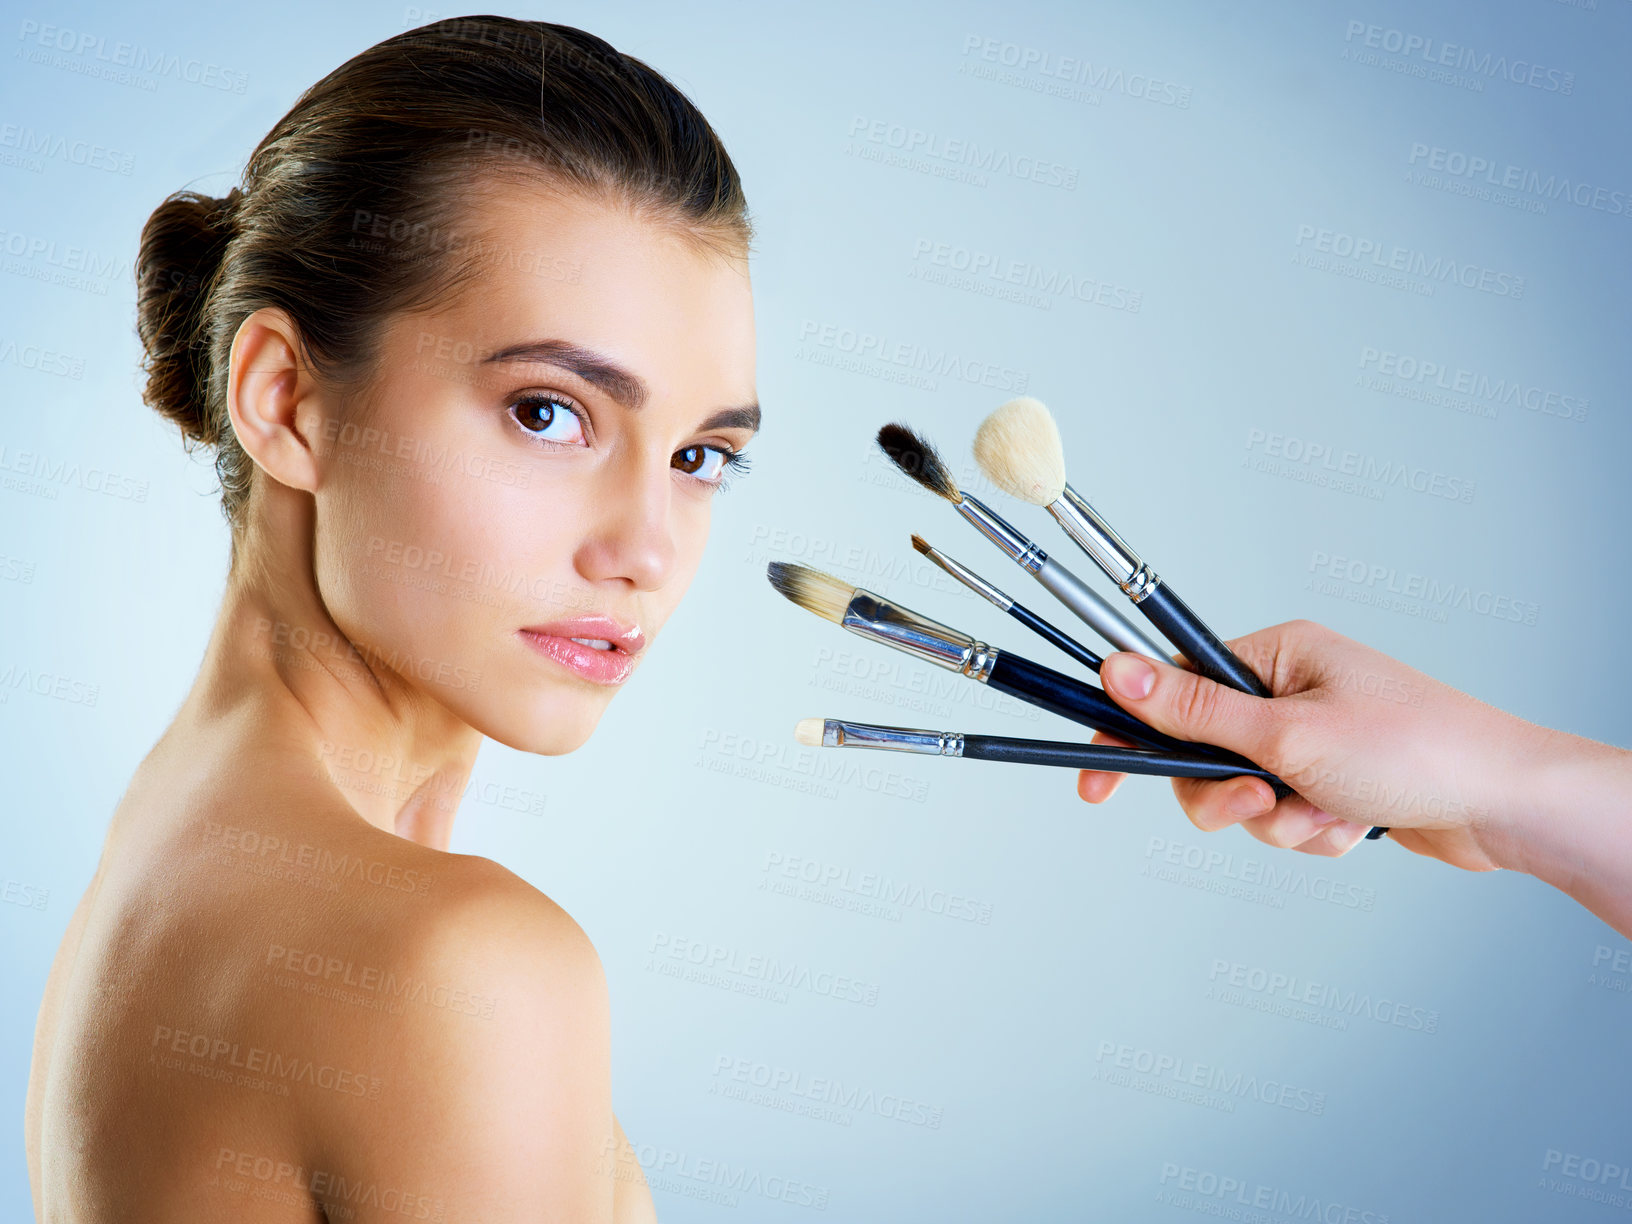 Buy stock photo Studio portrait of a hand holding makeup brushes next to a beautiful young woman against a blue background